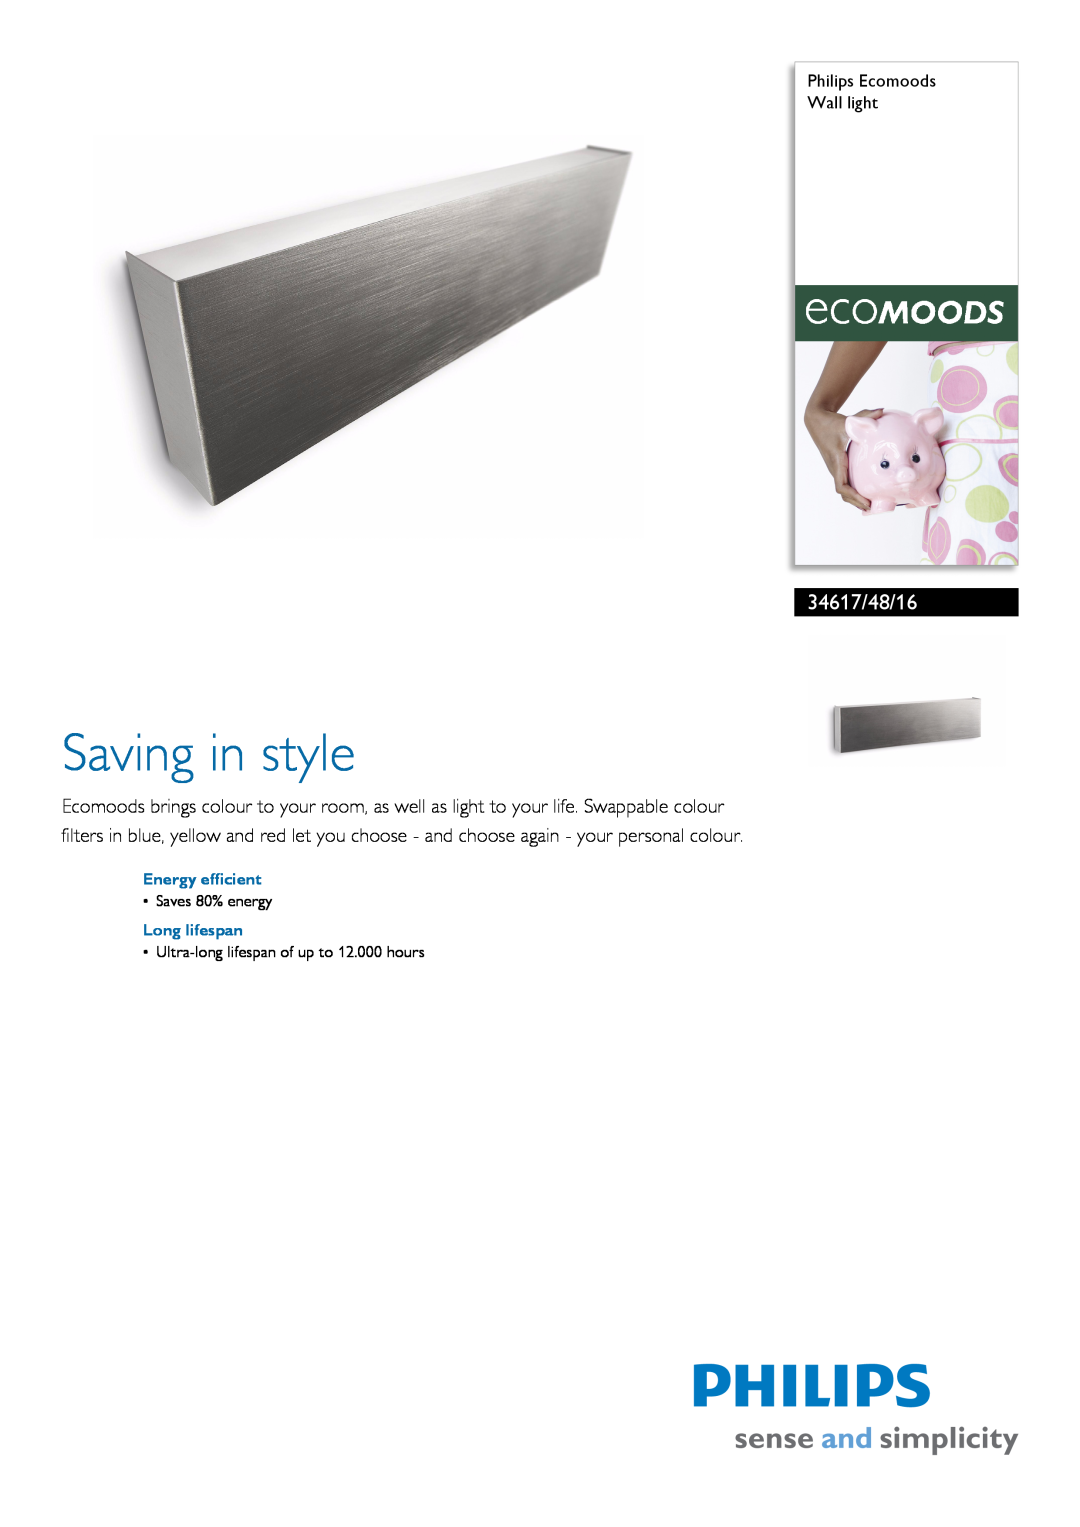 Philips 34617/48/16 manual Philips Ecomoods Wall light, Energy efficient, Long lifespan, Saving in style, Saves 80% energy 